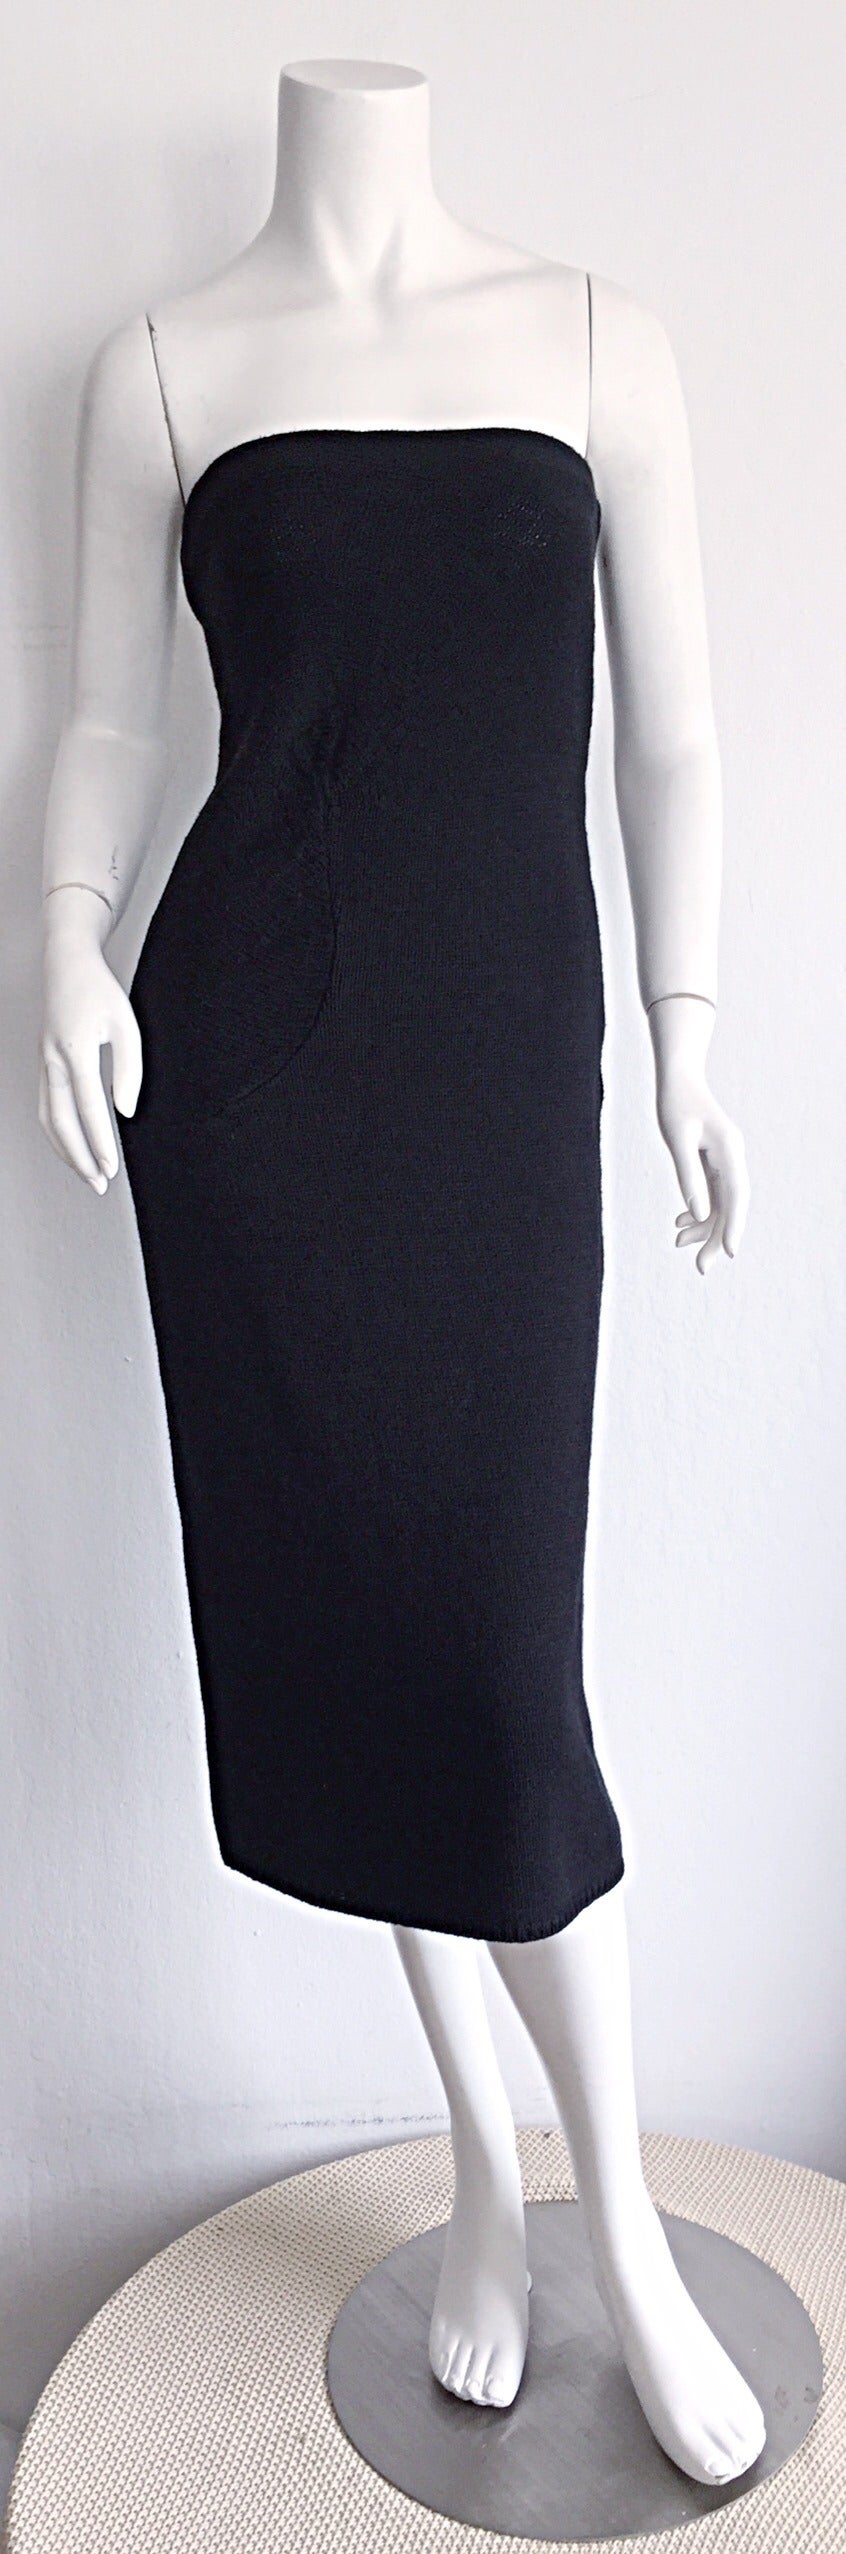 The ultimate Little Black Dress!!! Vintage Calvin Klein Collection black knit strapless dress. So much detail on this little beauty! Flattering ruched detail at waist that is ultra slimming. Very comfortable fit, with a chic, elegant look. Extremely